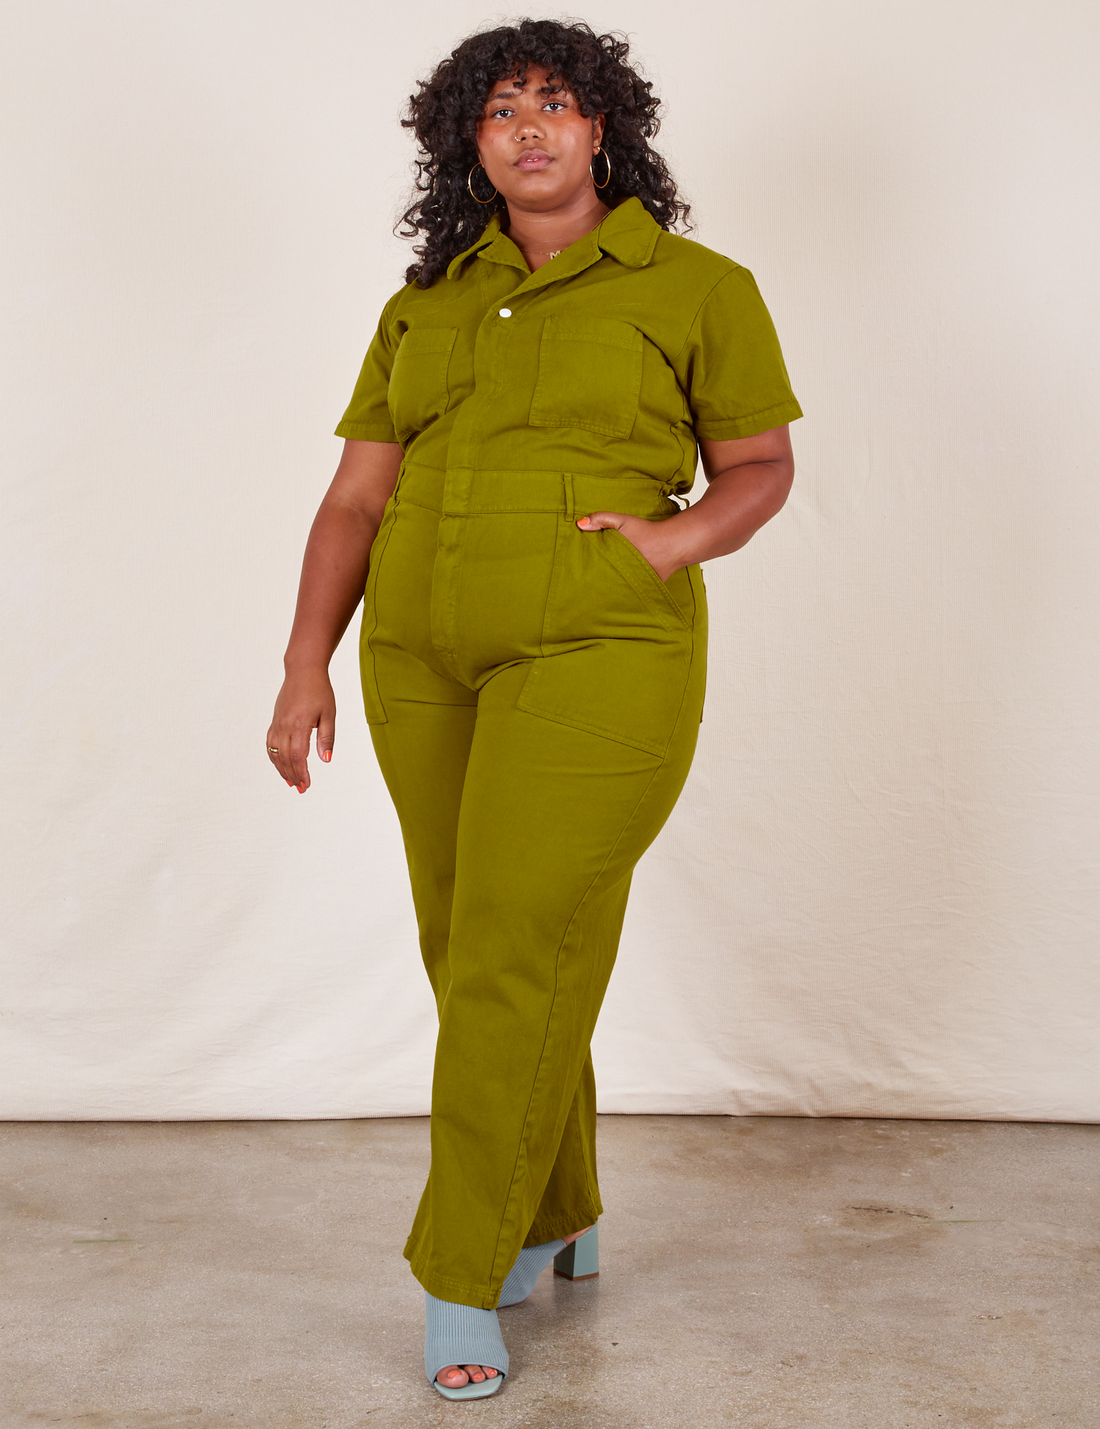 Morgan is 5'5" and wearing 2XL Short Sleeve Jumpsuit in Olive Green